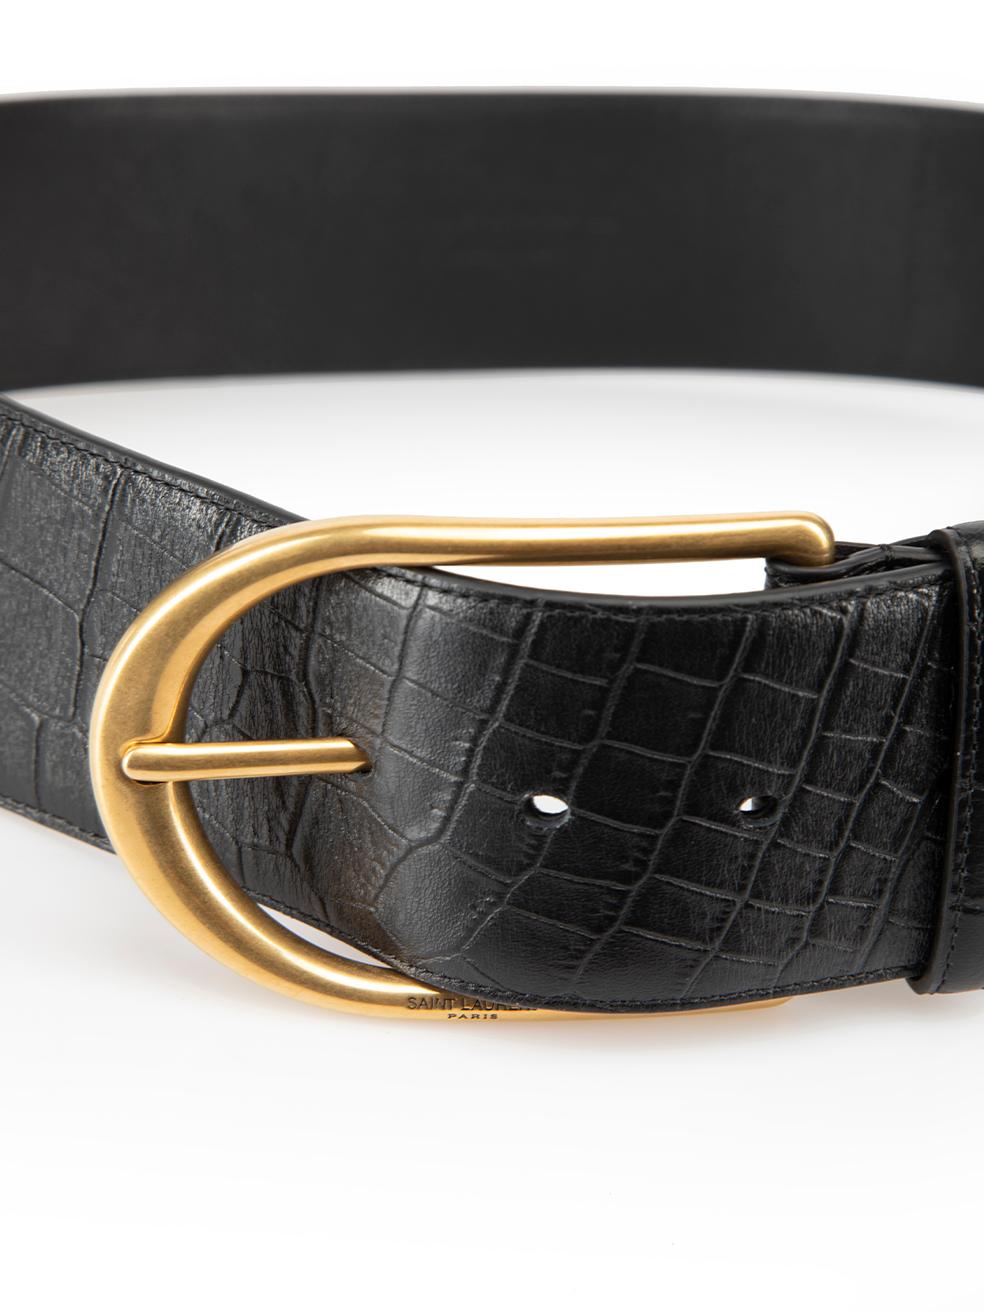 CONDITION is Never Worn. No visible wear to belt is evident on this used Saint Laurent designer resale item.



Details


Black

Leather

Crocodile embossed pattern

Gold buckle

Wide belt



 

Made in Italy 

 

Composition

EXTERIOR: